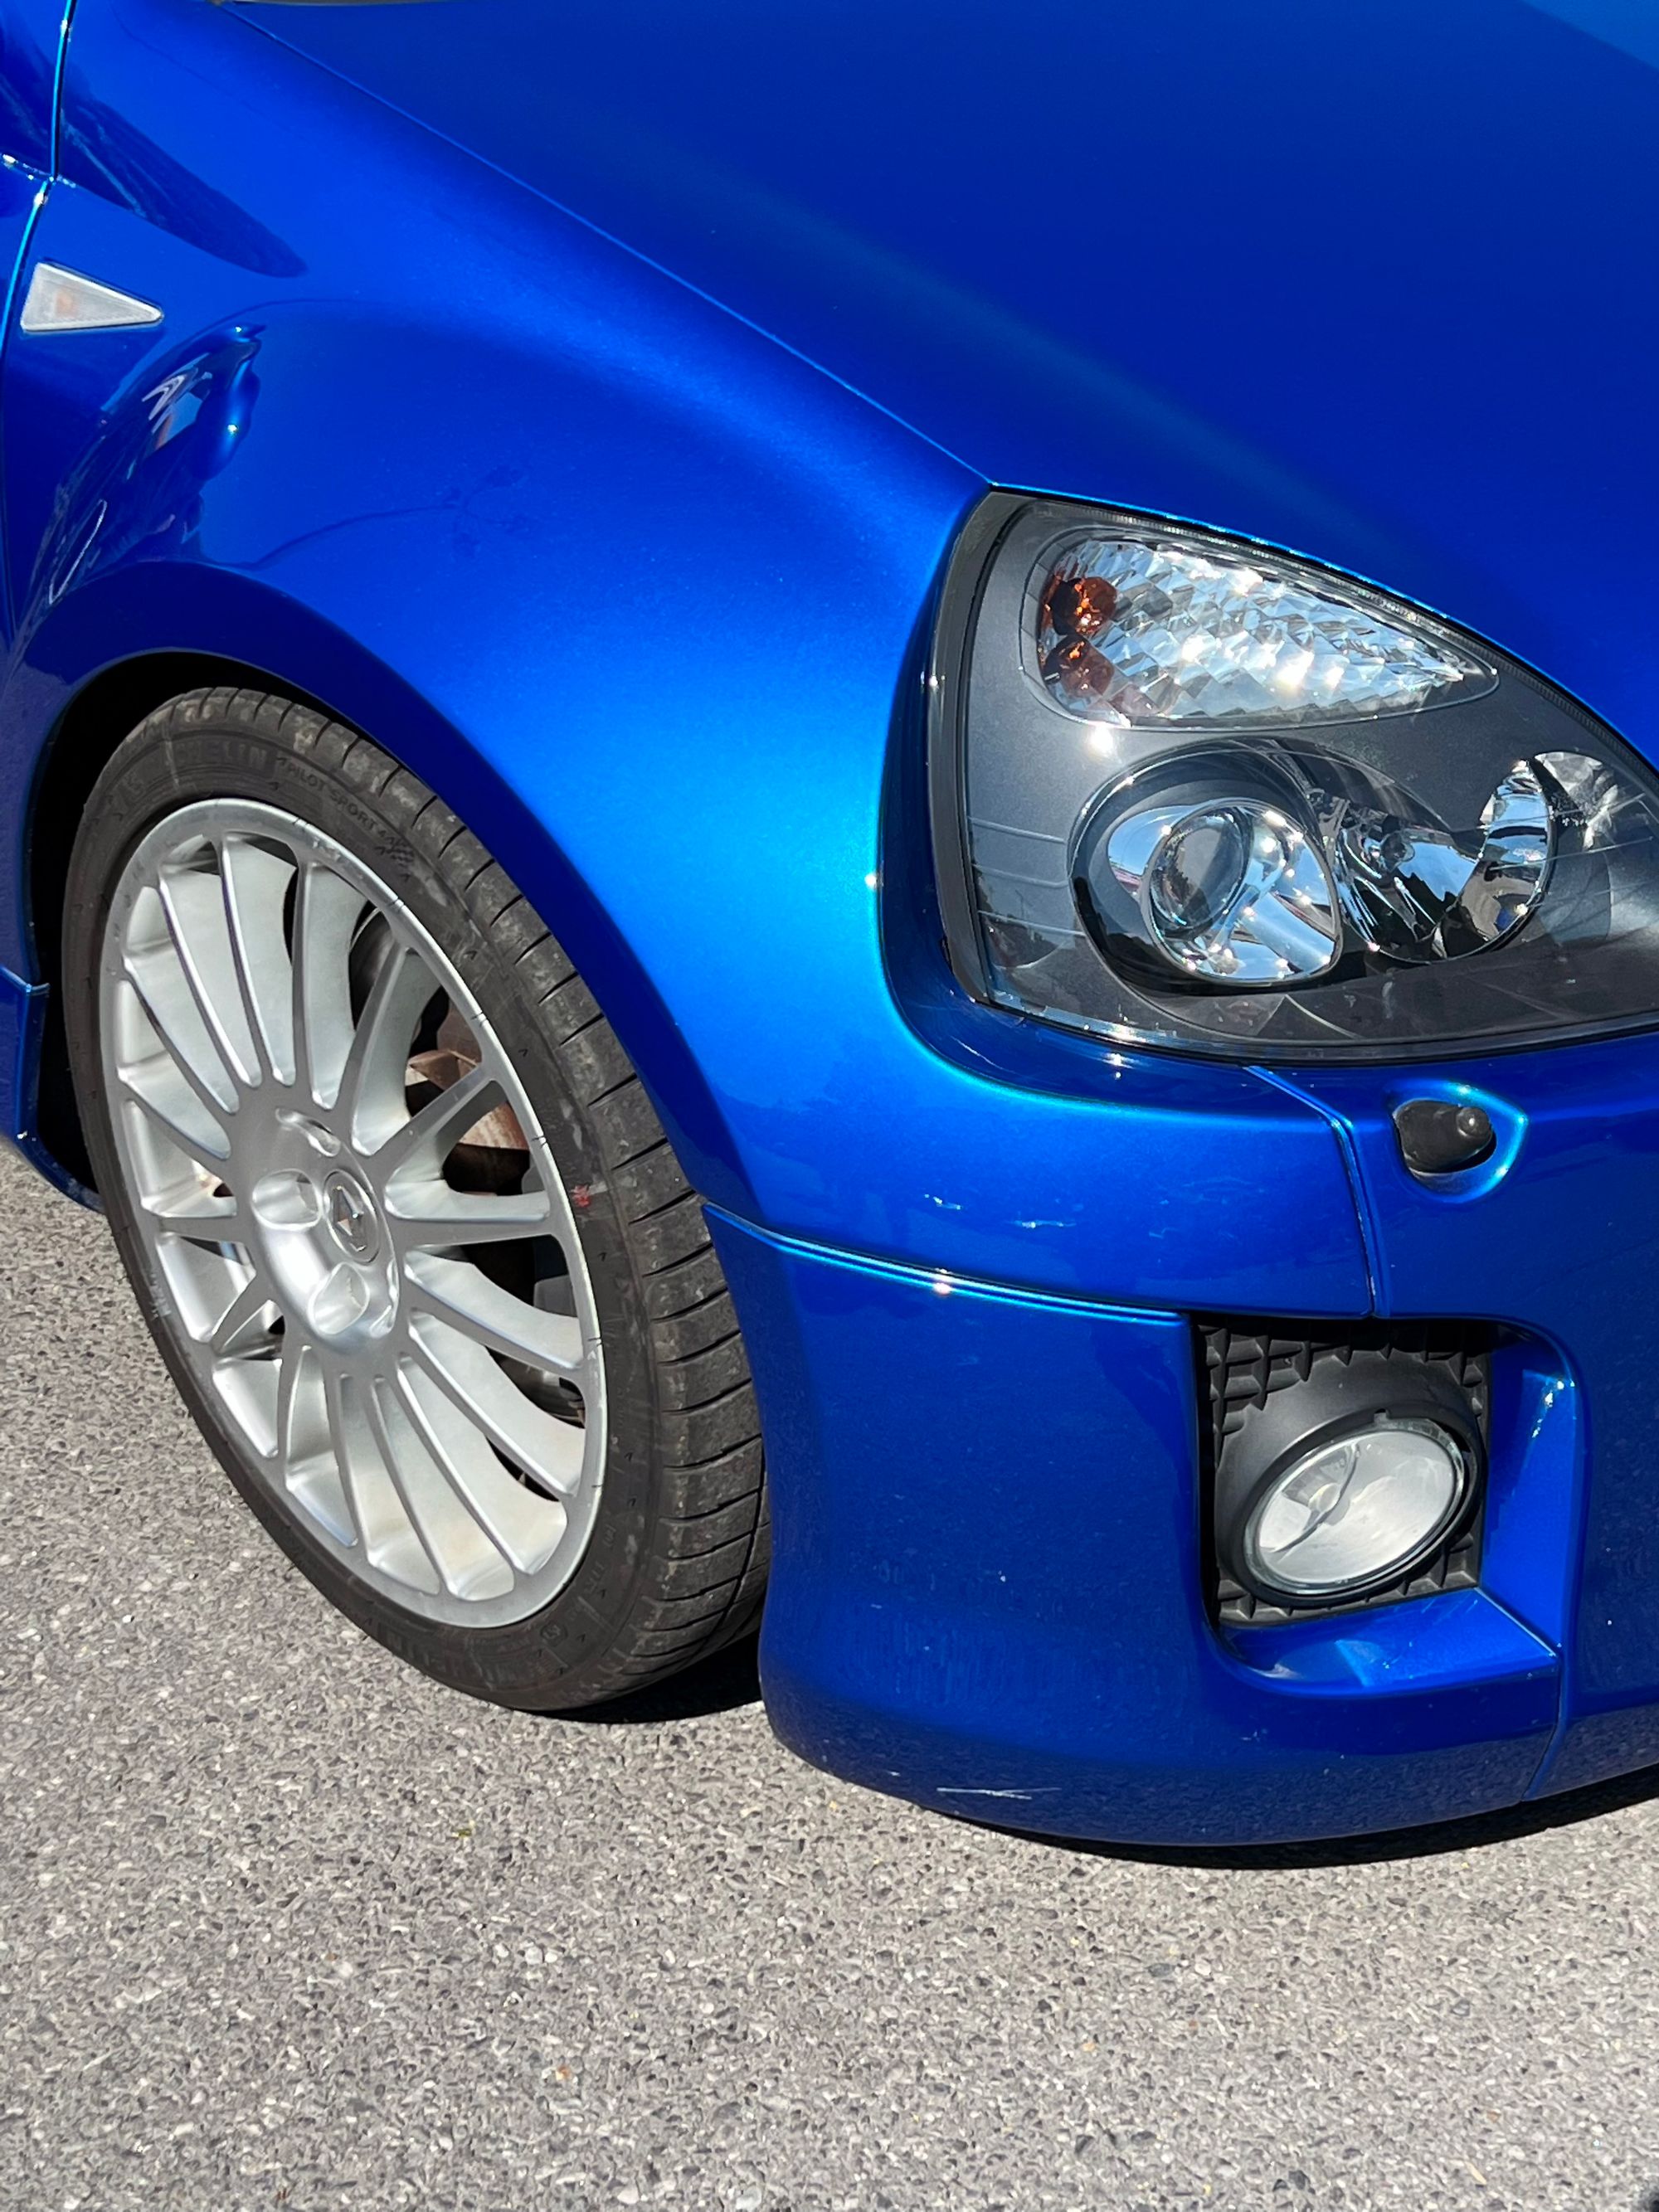 wheel and front bumper detail of renault sport clio v6